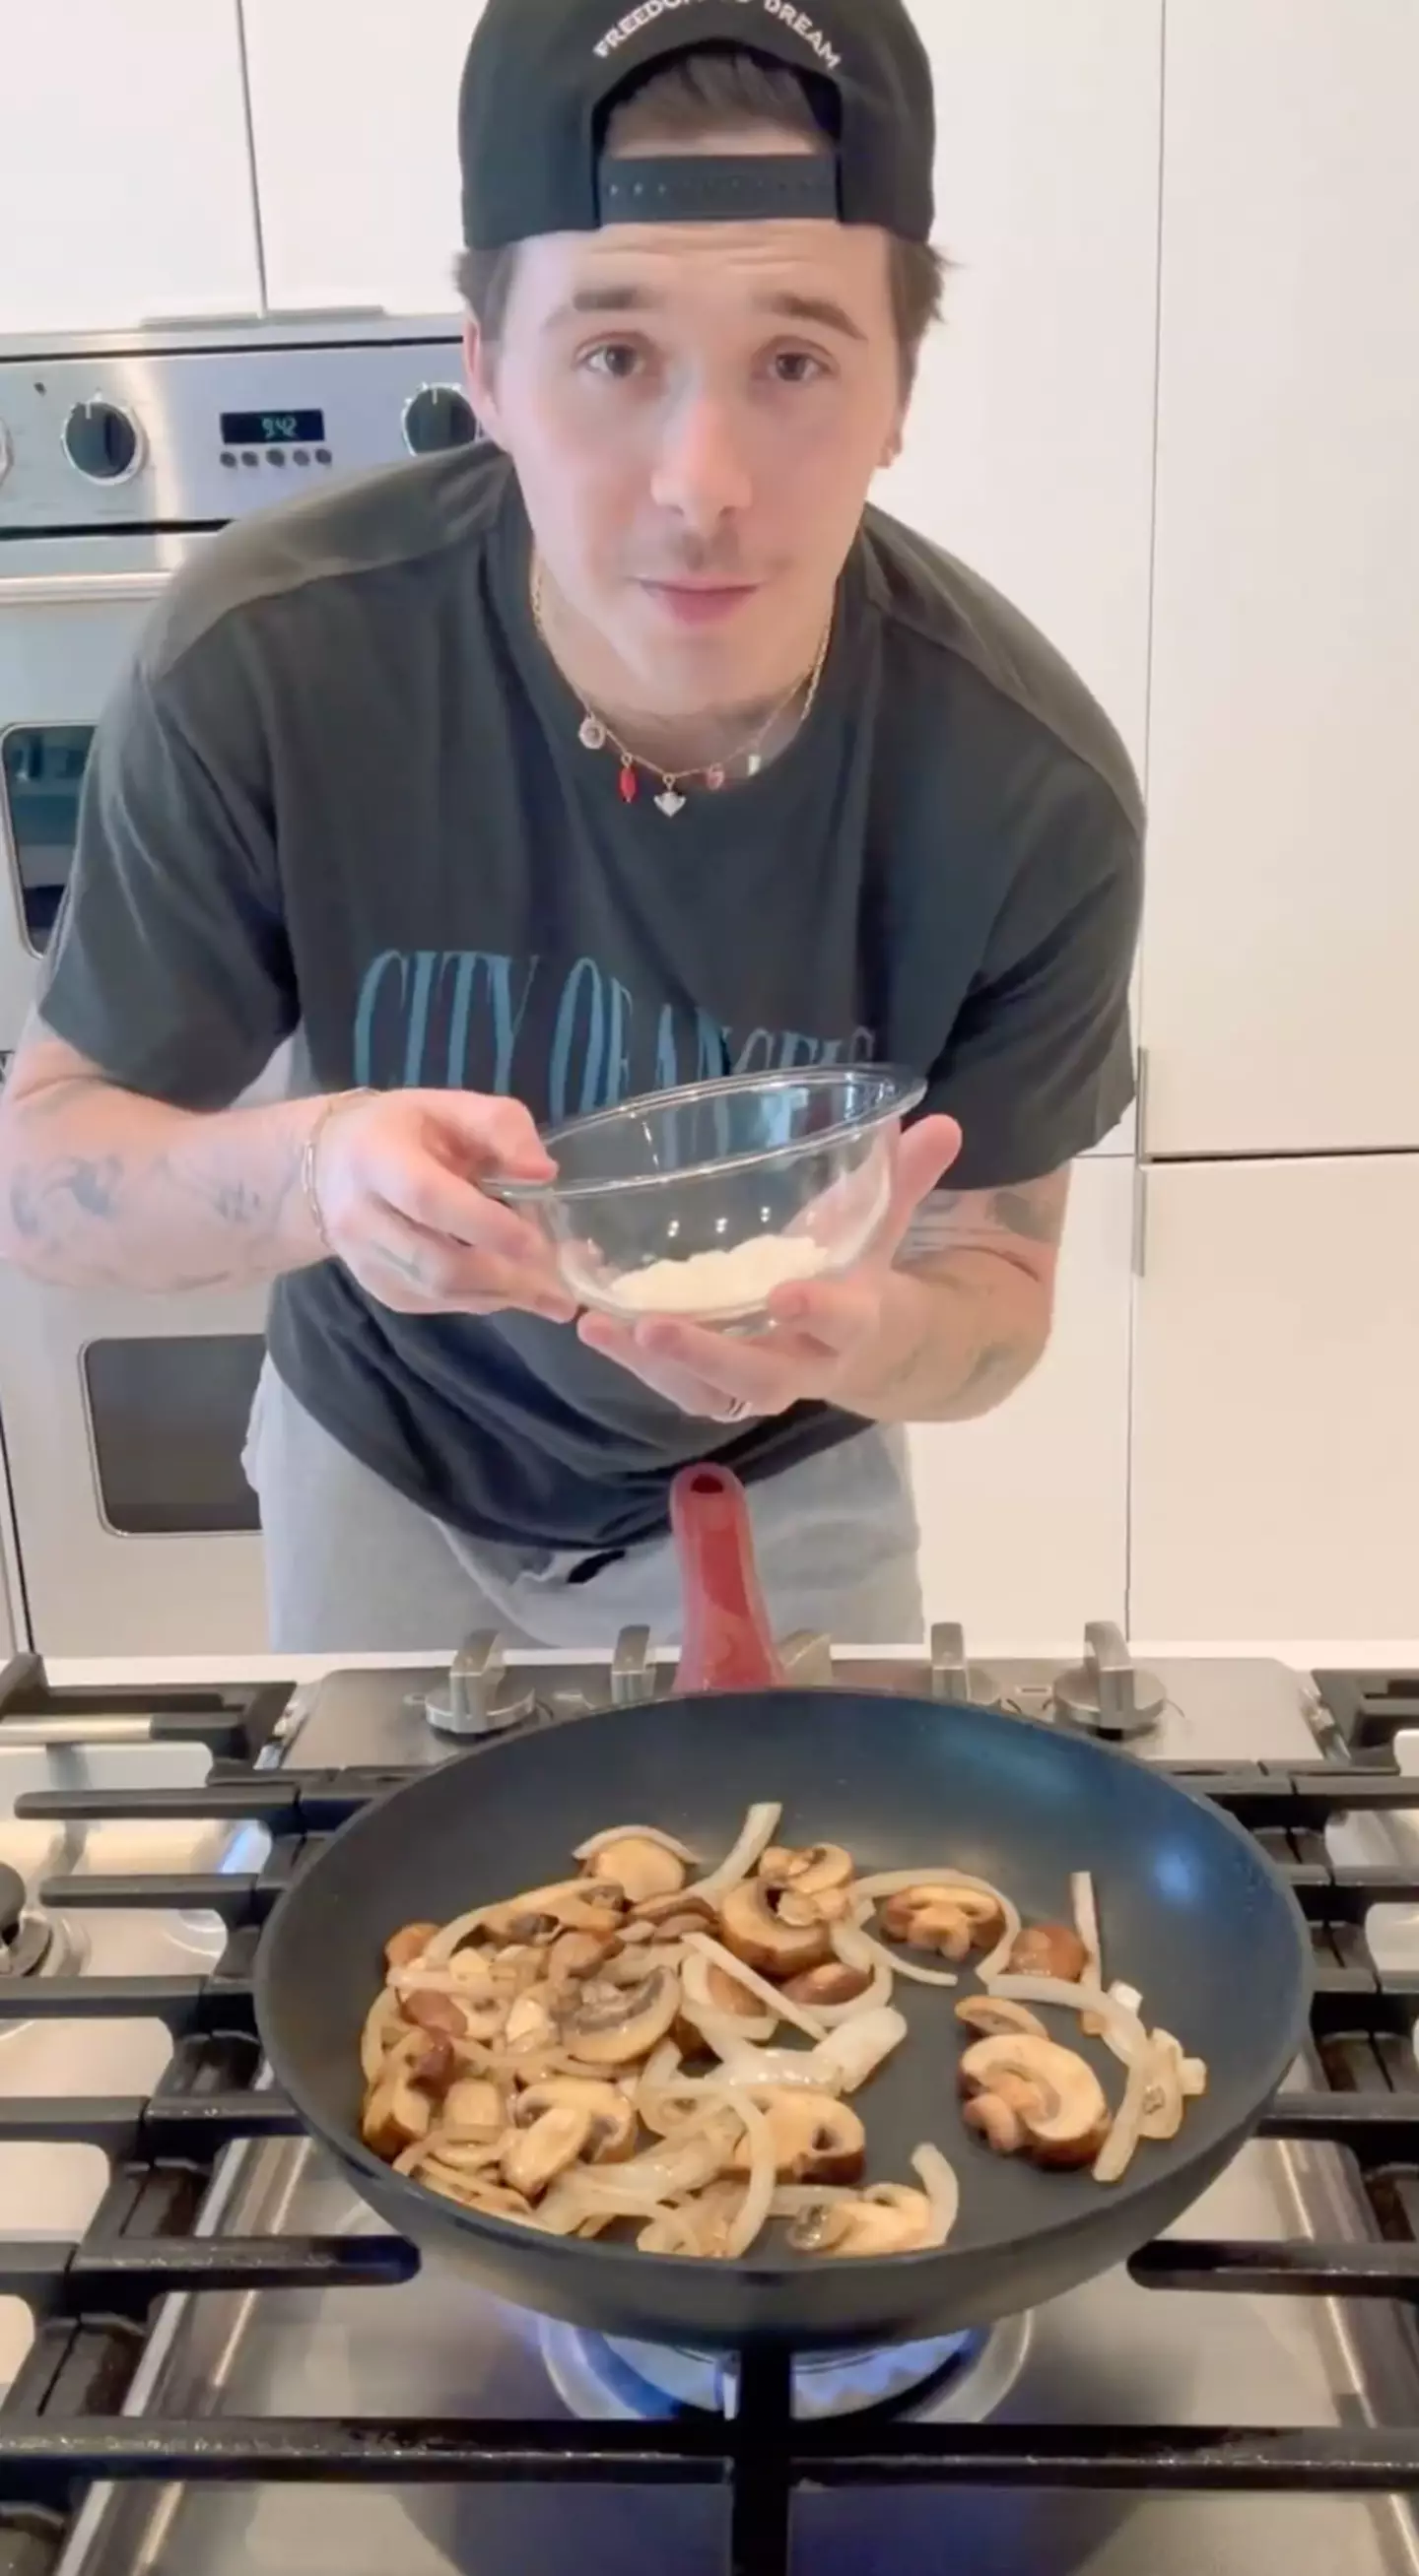 Brooklyn Beckham has been trolled for his grilled cheese sandwich tutorial.